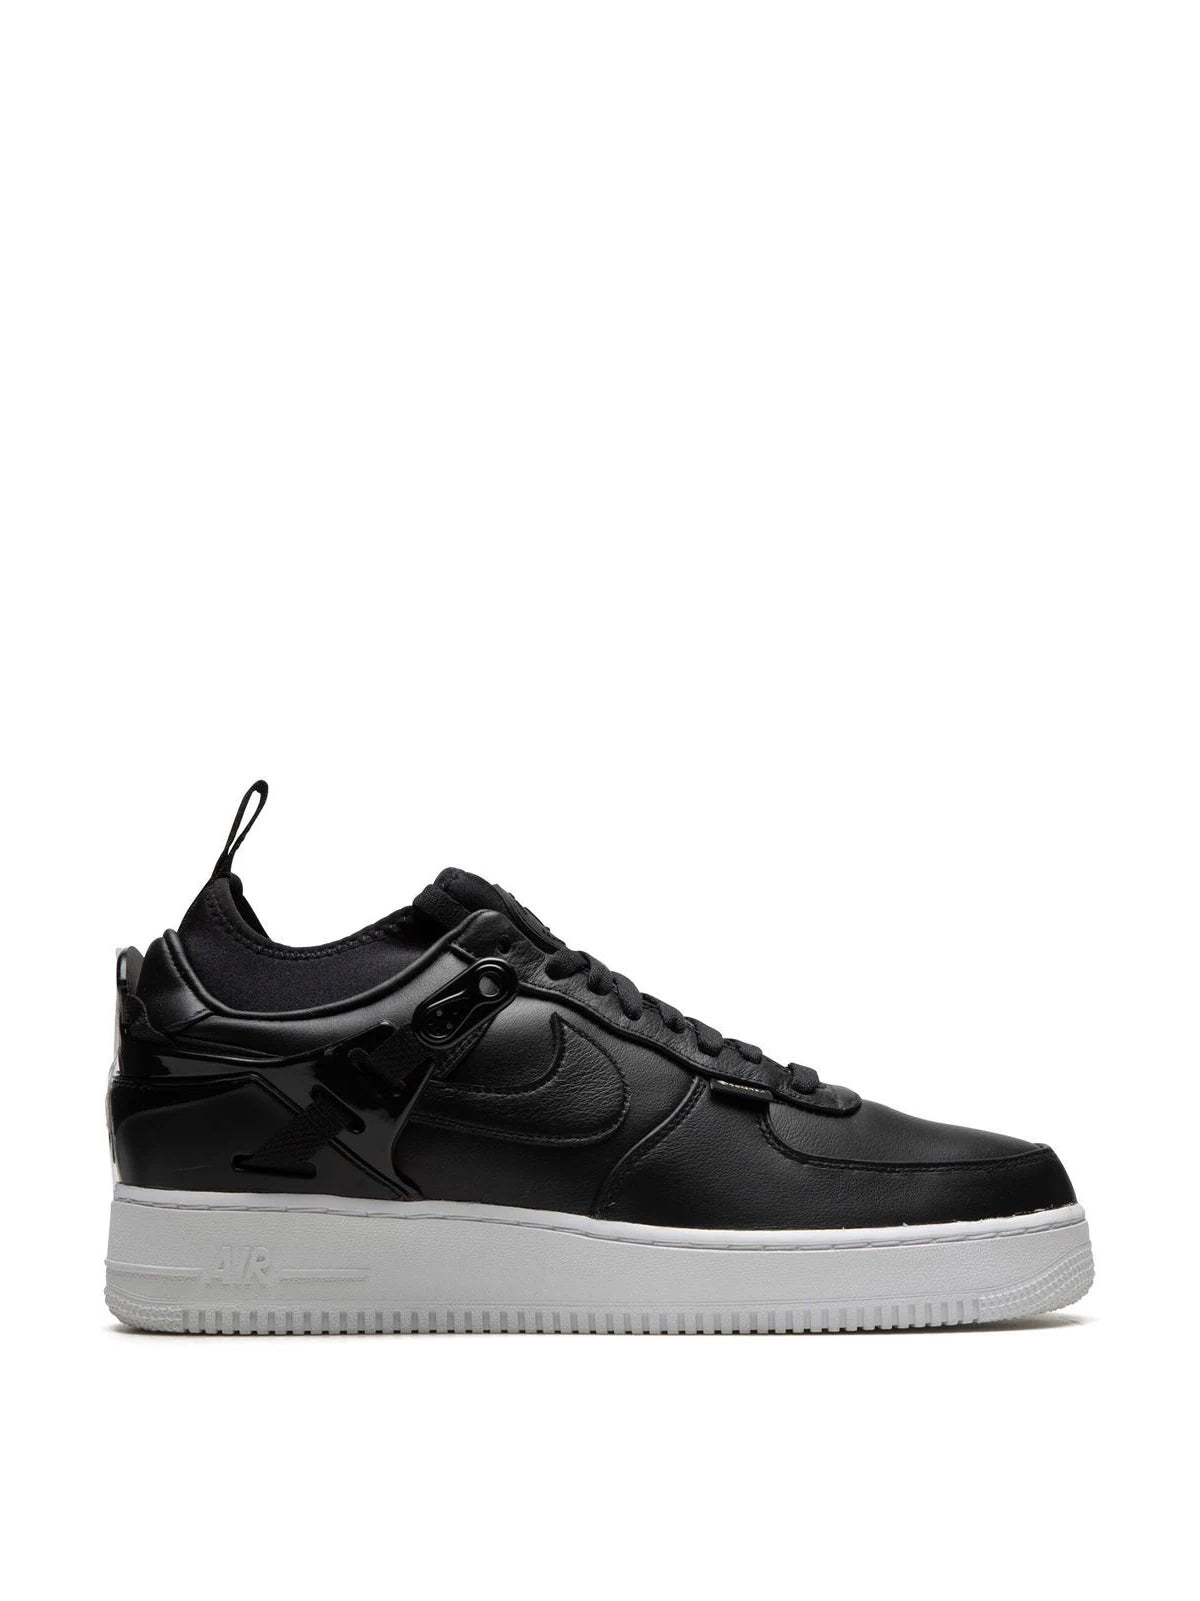 Nike x Undercover Air Force 1 Low SP Sneakers